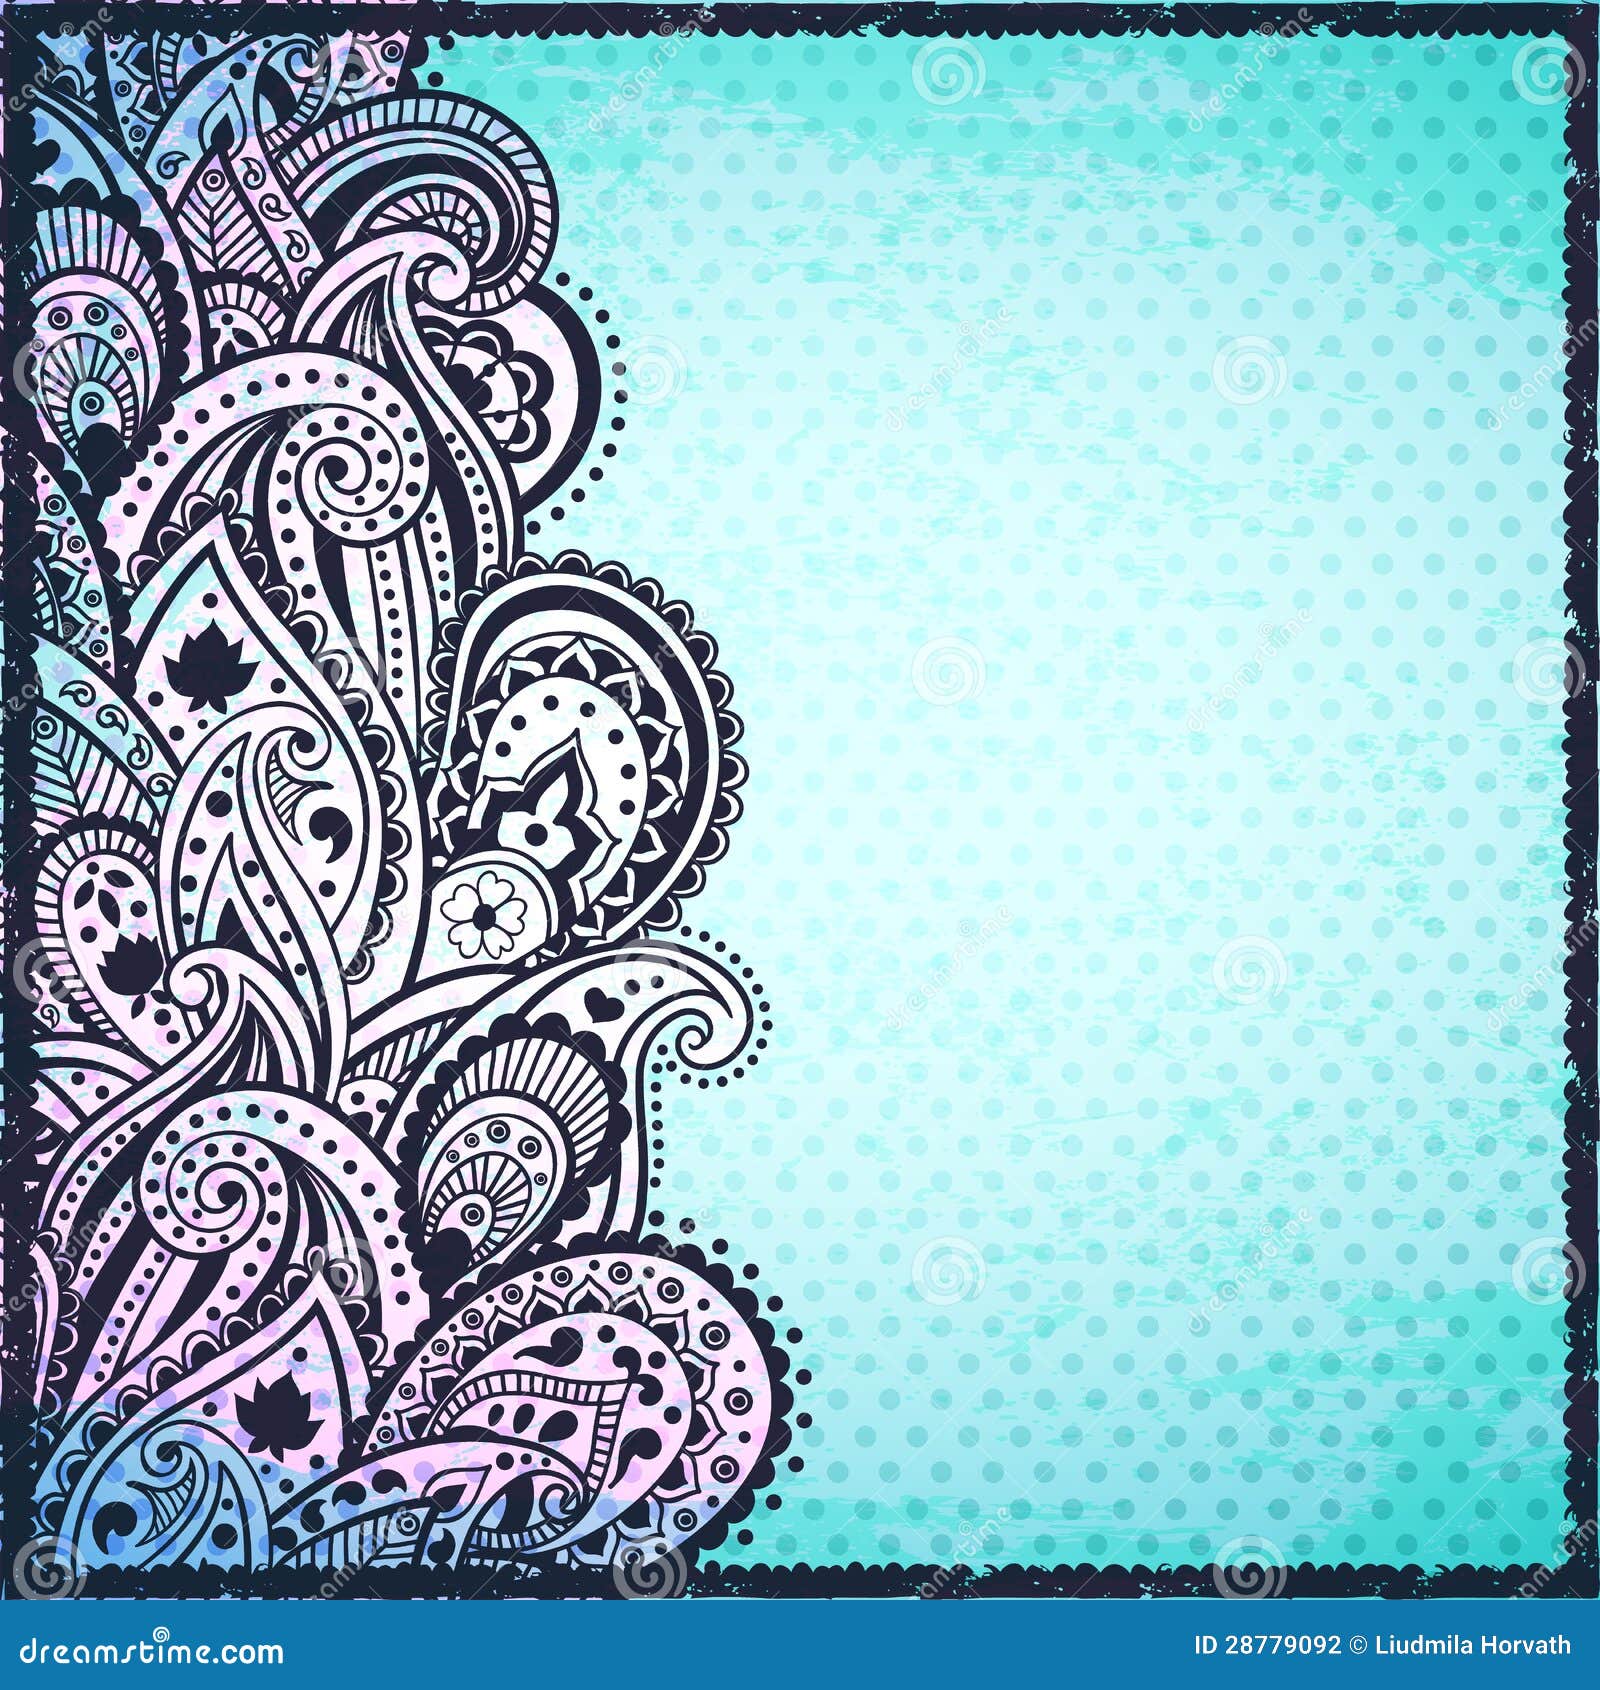 Abstract Blue Paisley Background Stock Photography - Image: 28779092